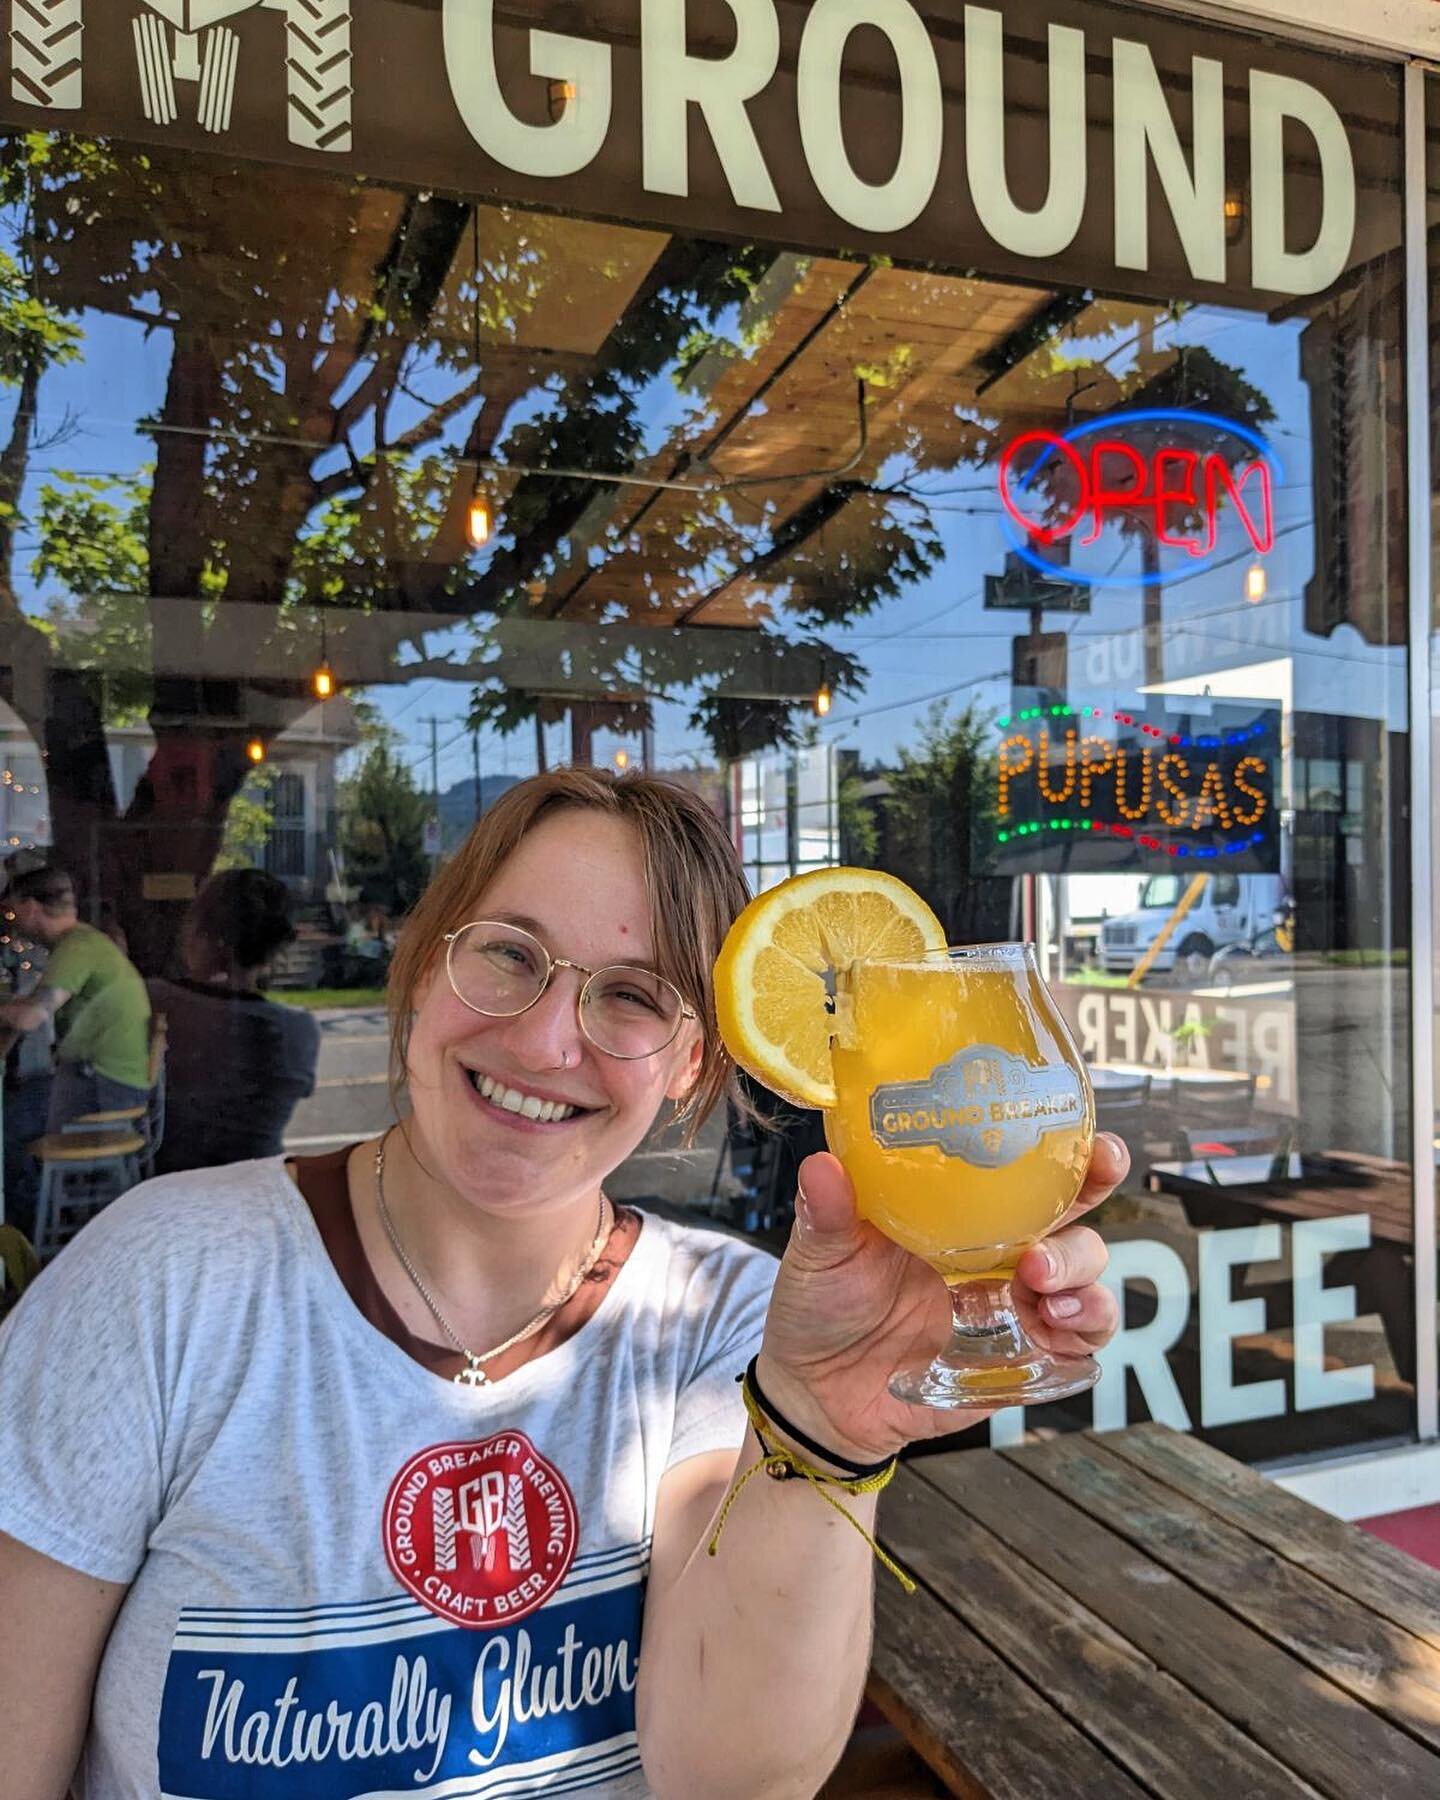 It's American Craft Beer Week! All week long you can get $4 Lager Tops at our pub. A glass of 99 Light topped with a bit of fresh lemonade. And it's Wednesday, so come in and enjoy $5 pints and papusas from our friends at Salvi PDX .

#acbw2023